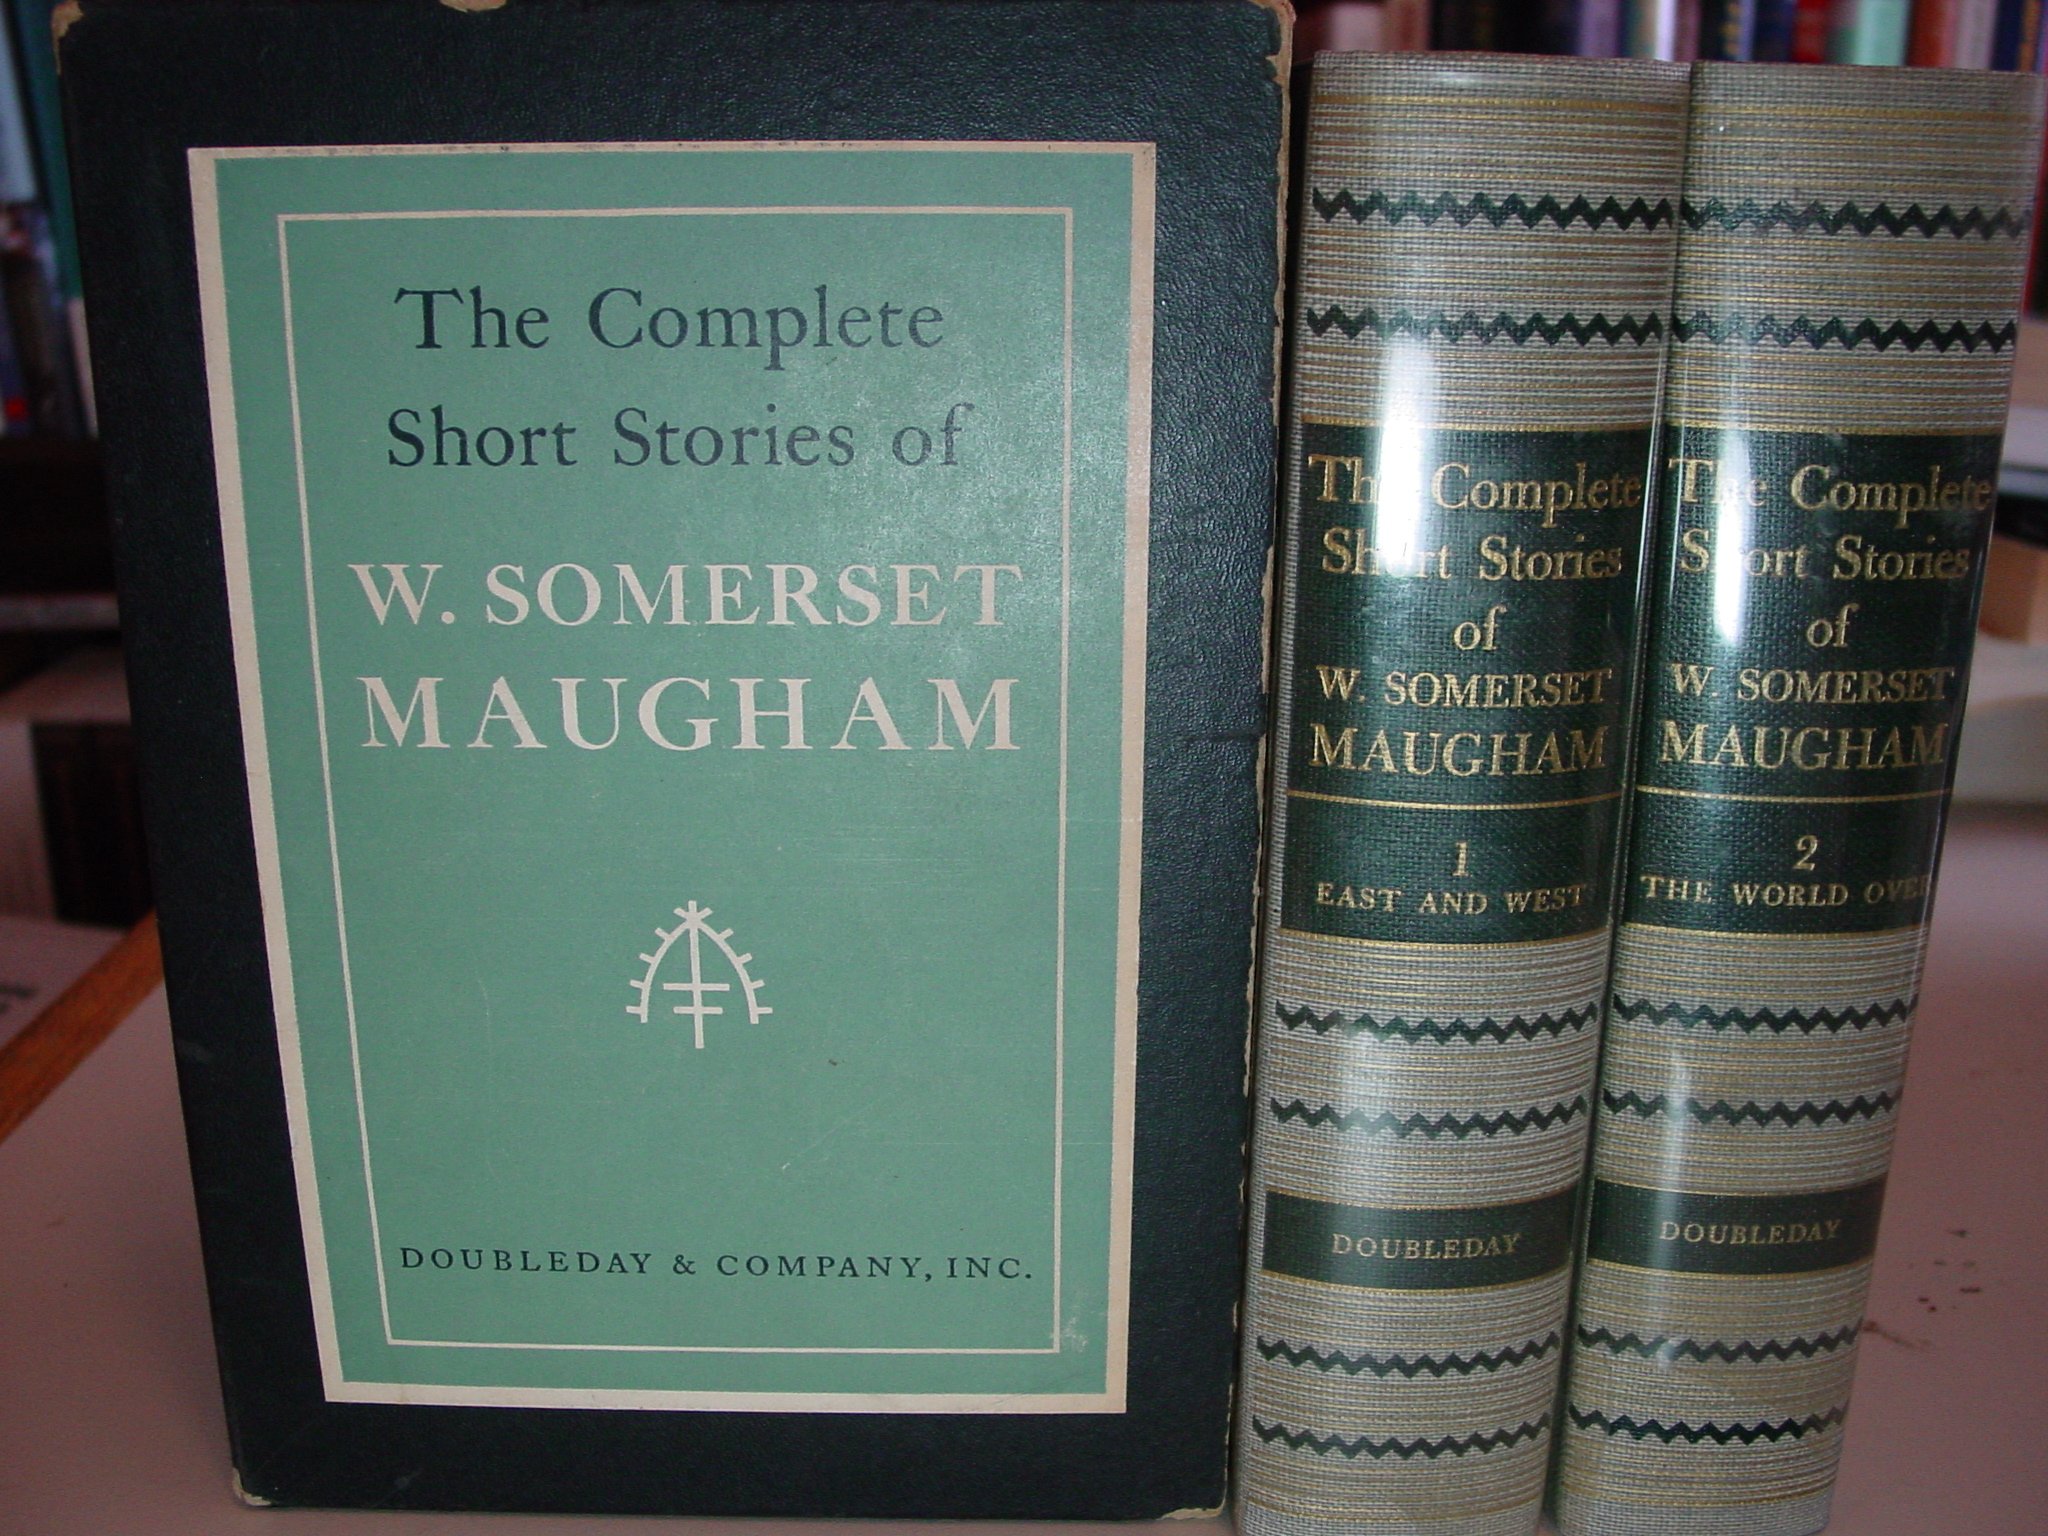 The Complete Short Stories of W. Somerset Maugham: The World Over